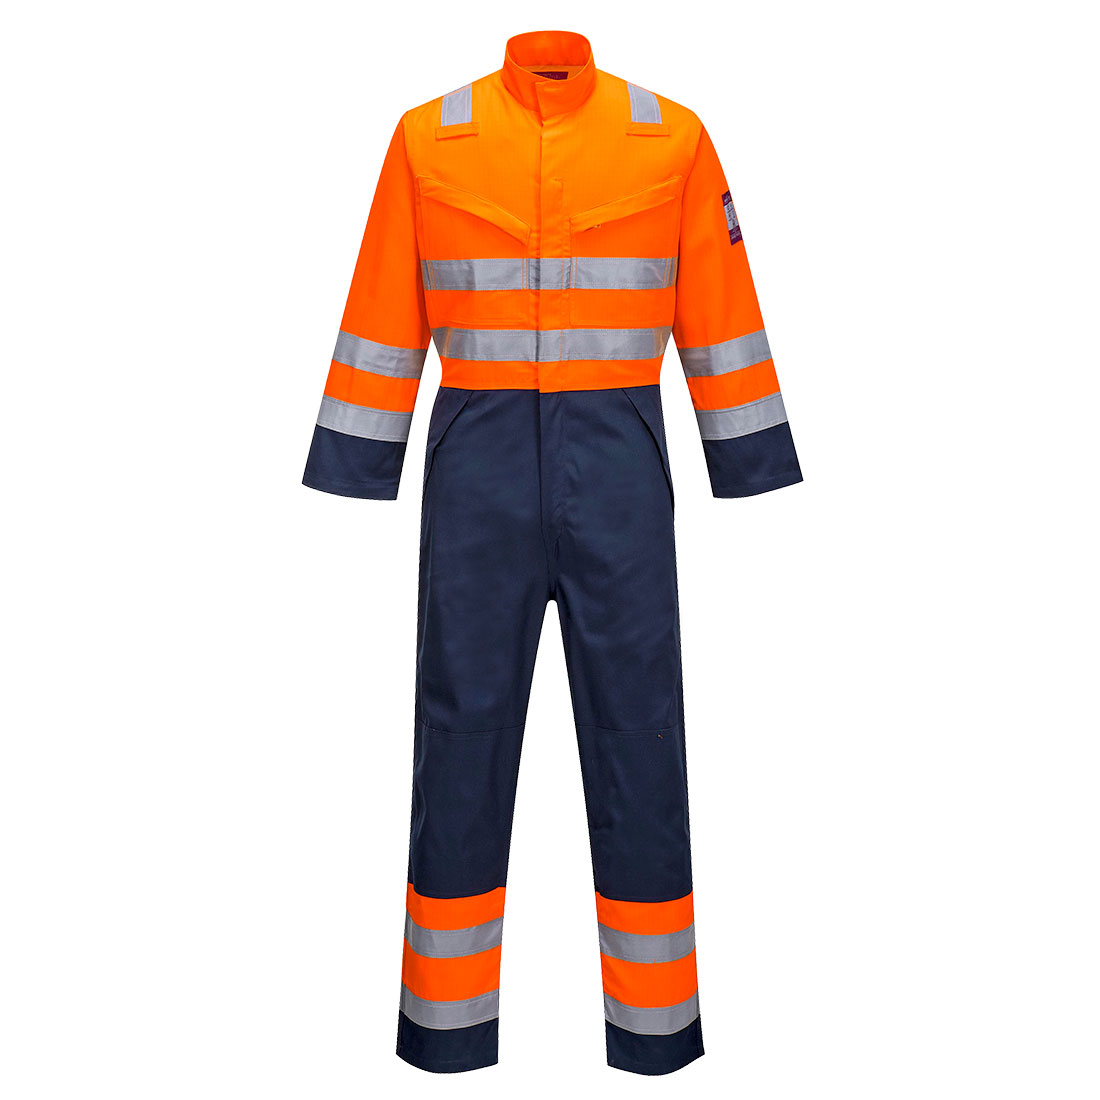 Heavy Duty Multi-Risk Modaflame Flame Resistant RIS Coverall